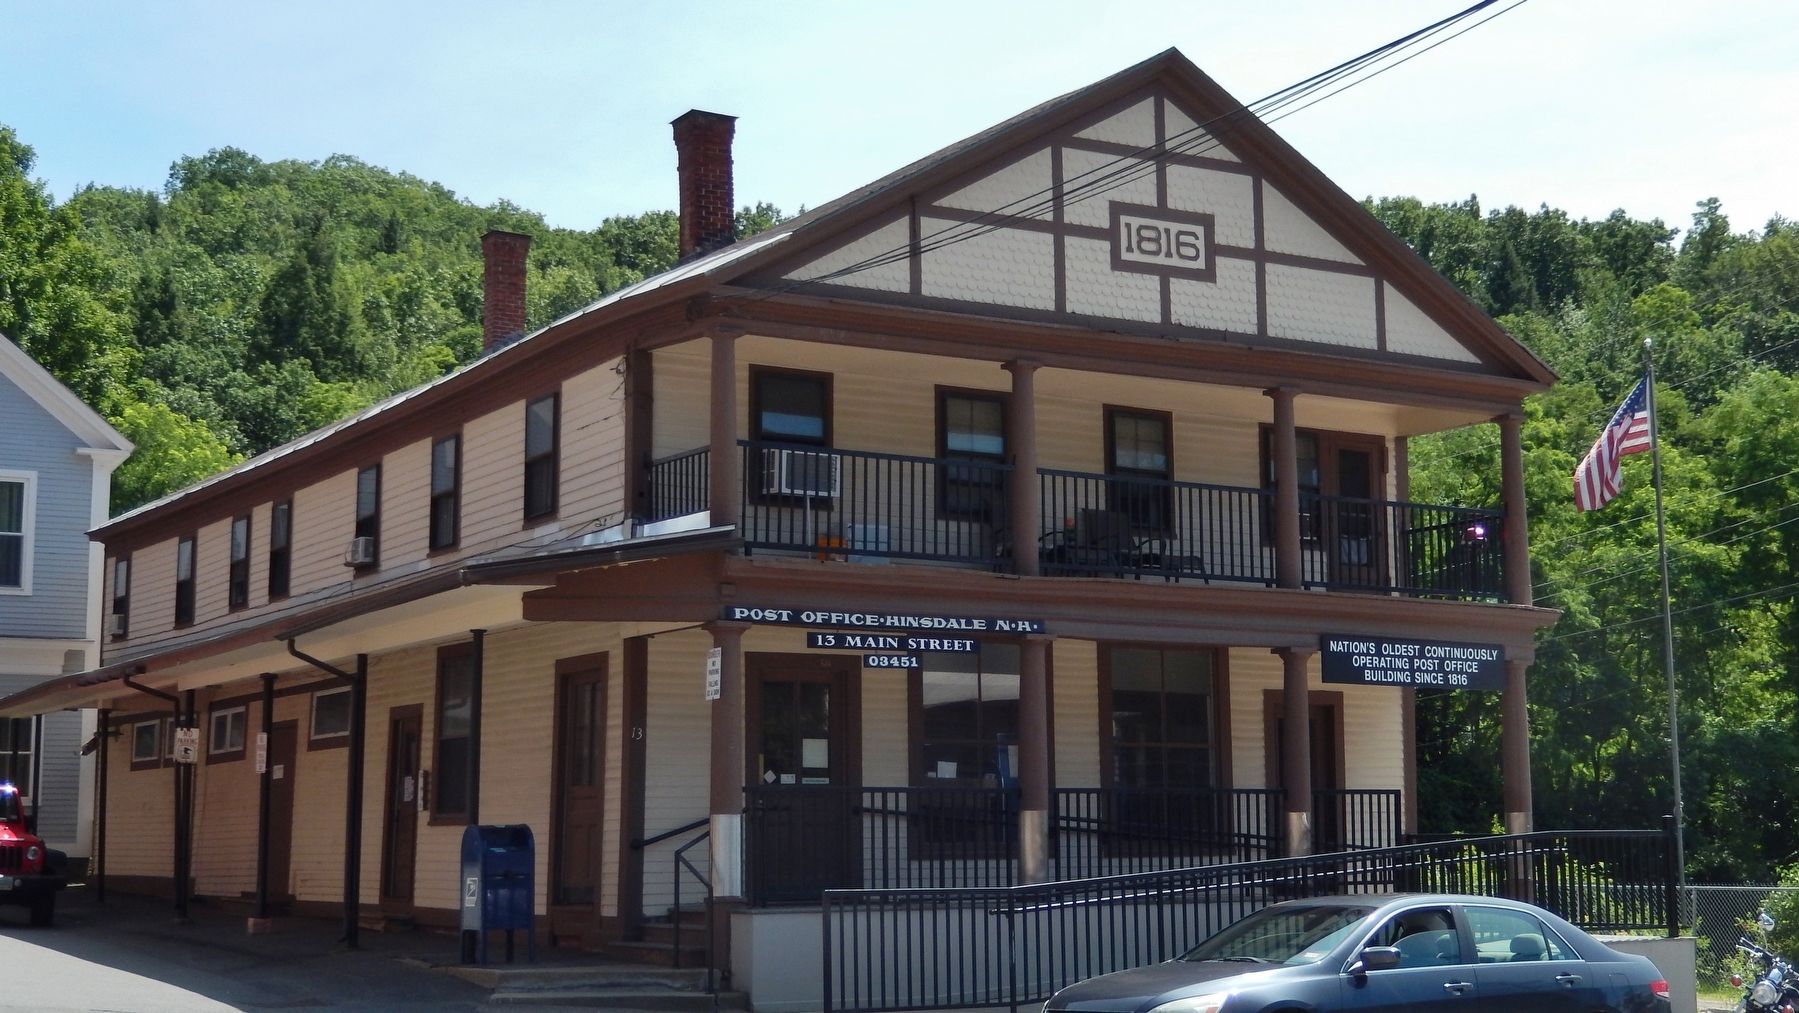 Nation's Oldest Continuously Operating Post Office Building image. Click for full size.